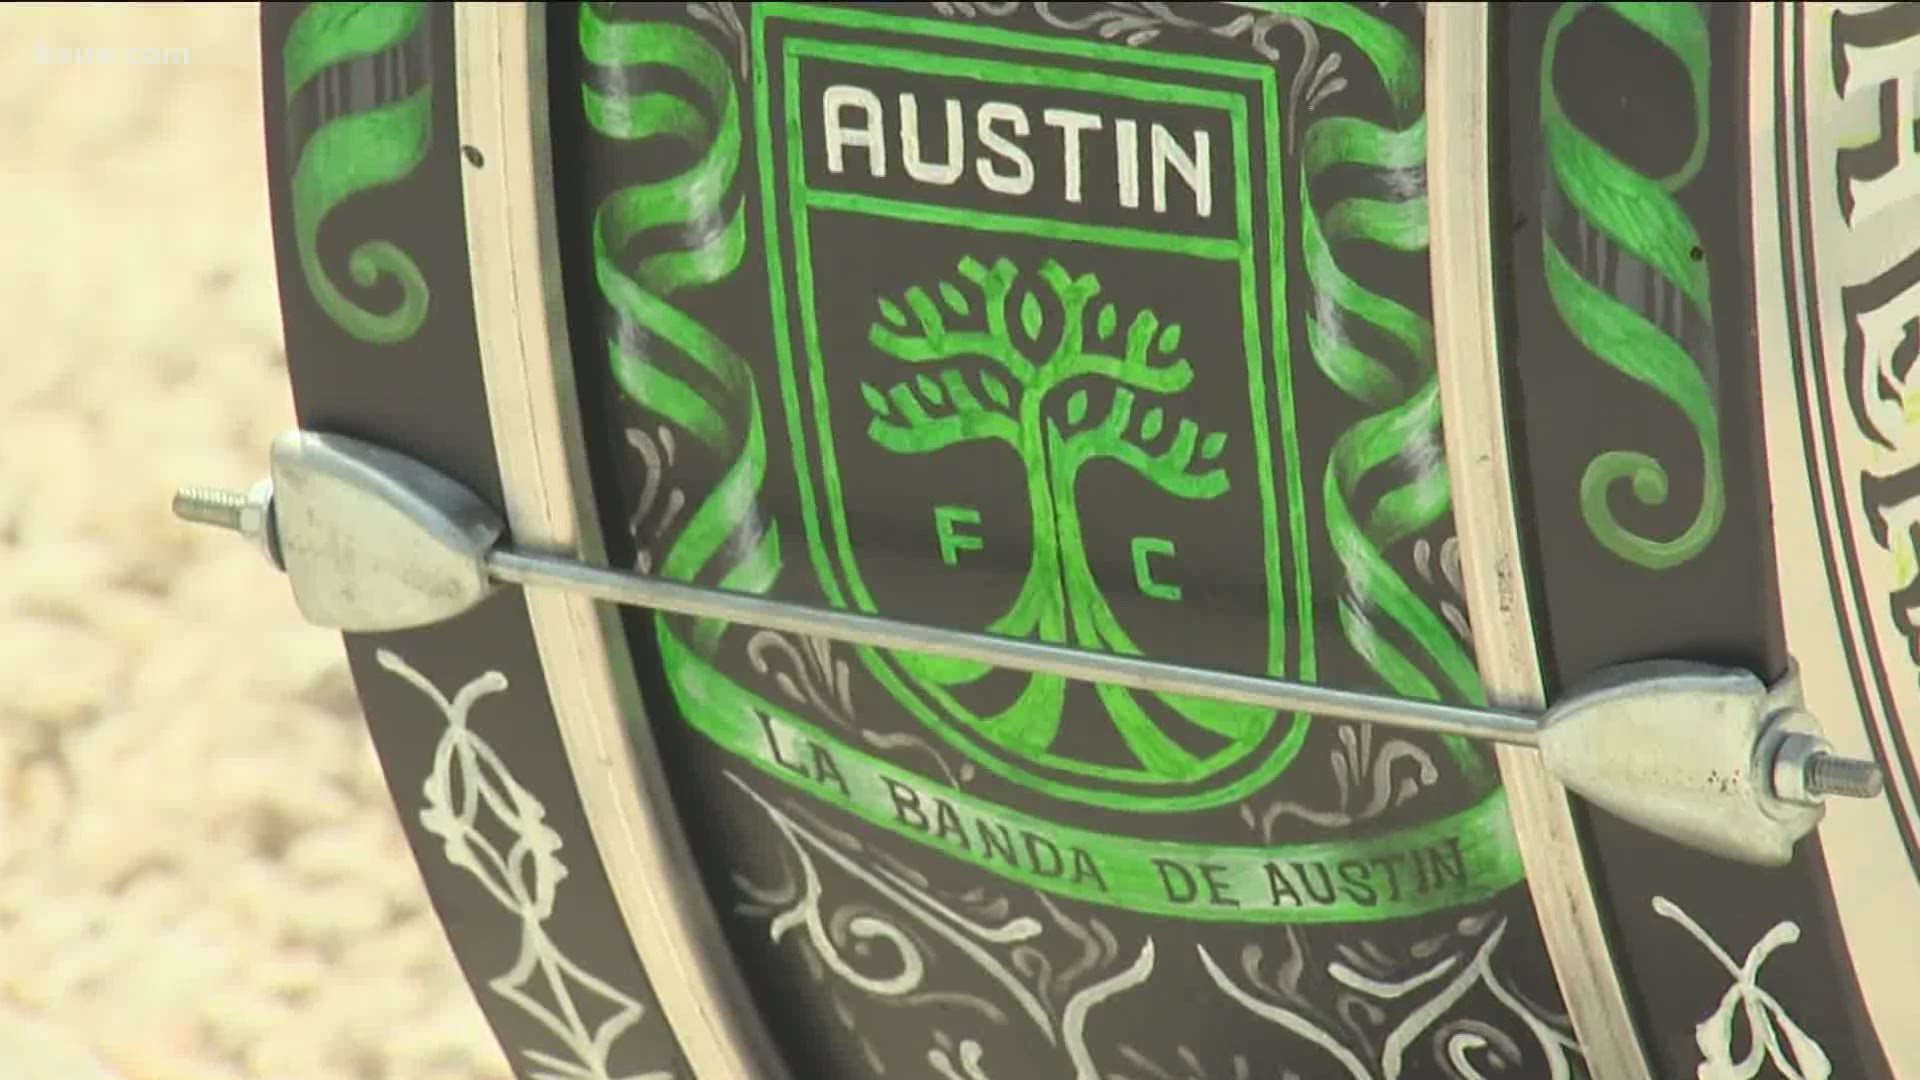 Los Verdes, a supporters group for Austin FC, is partnering with the Austin Justice Coalition.